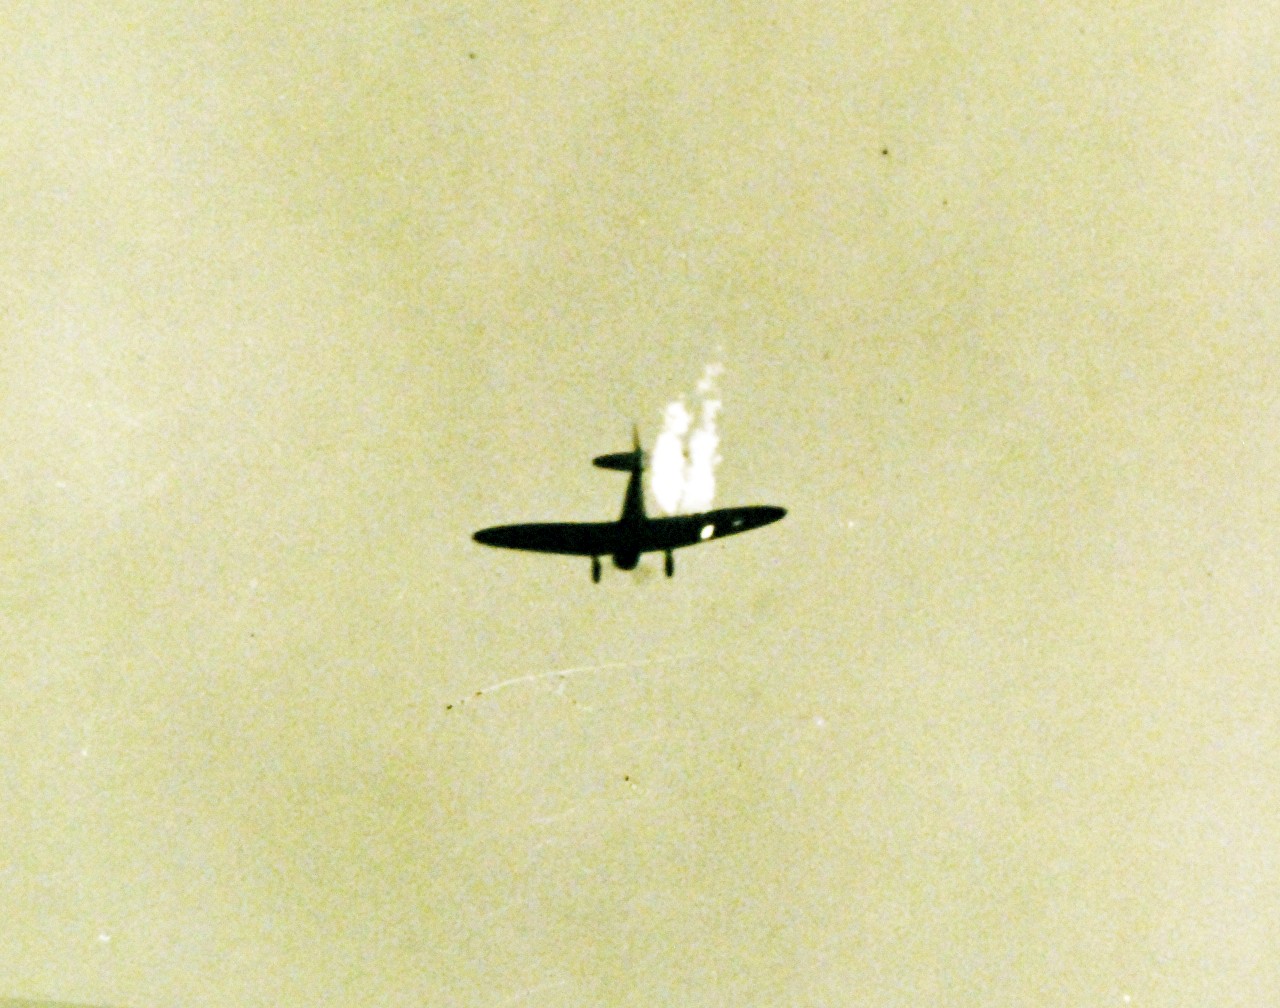 80-G-32952:  Japanese Attack on Pearl Harbor Attack, 7 December 1941.   Japanese Navy Type 99 Carrier Bomber, an Aichi D3A “VAL”,  shot down at Pearl Harbor during the Japanese Attack.  U.S. Navy photograph, now in the collections of the National Archives.  (9/13/2013).